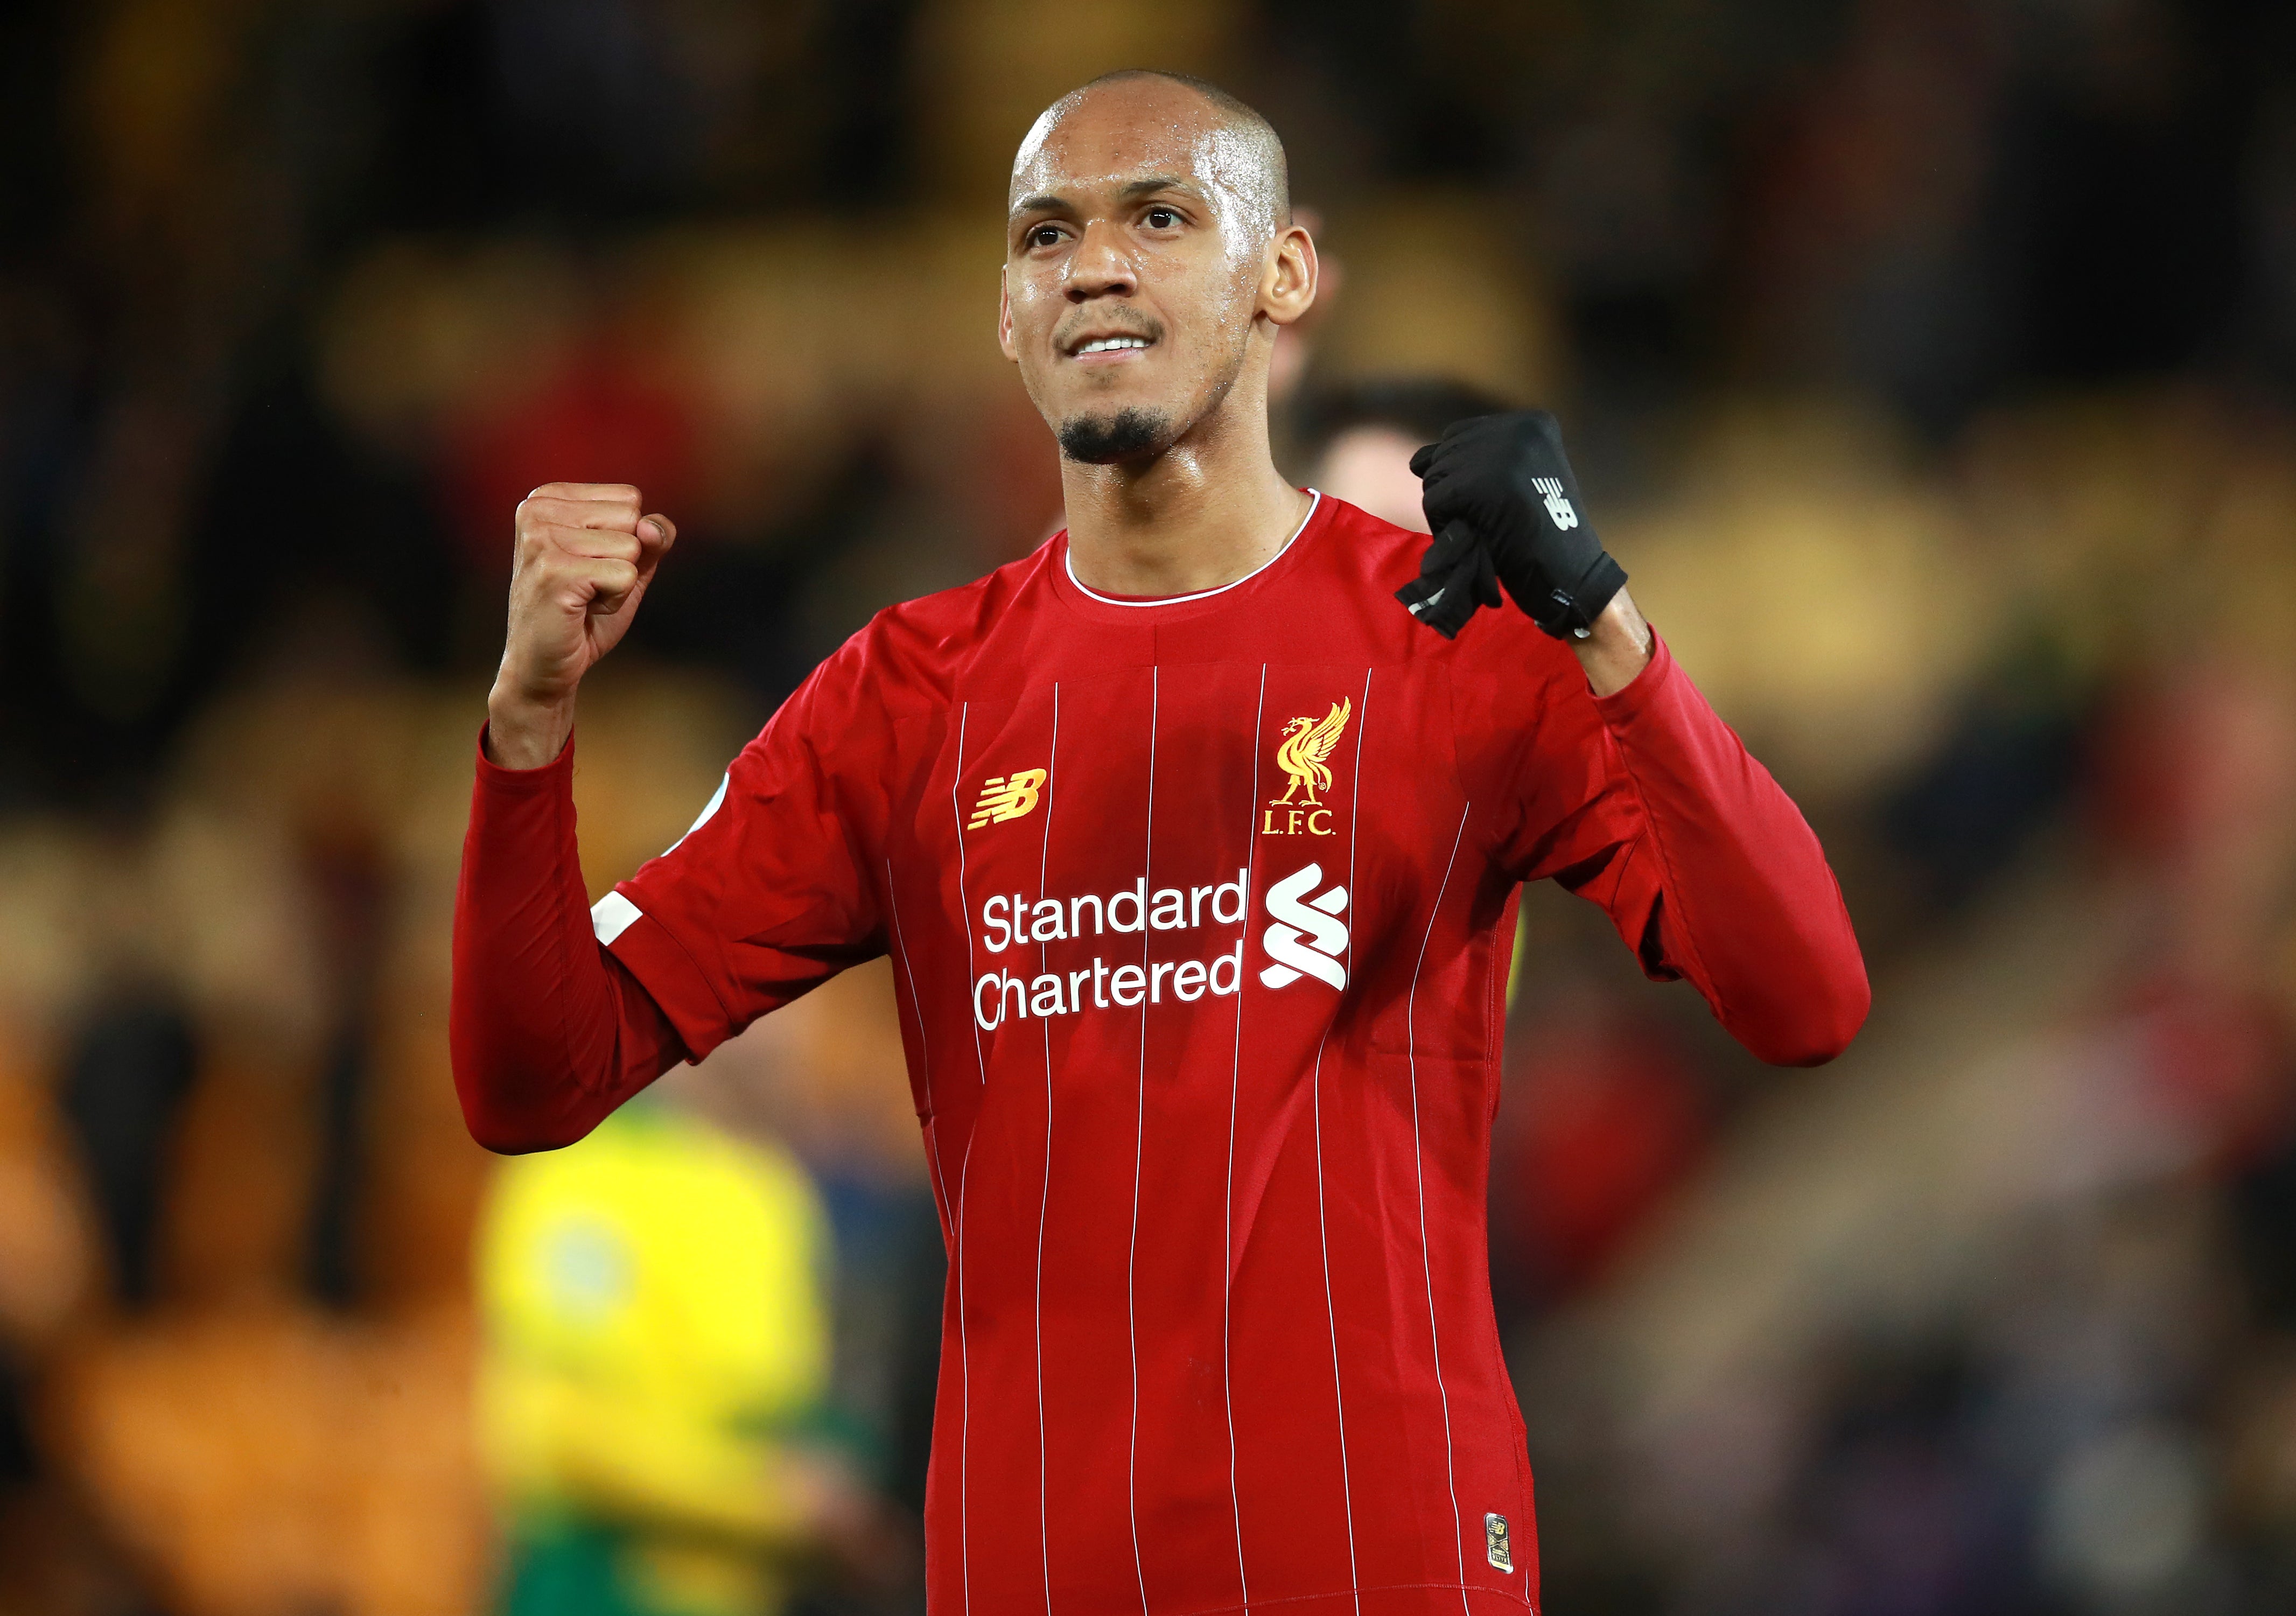 Fabinho Liverpool midfielder delighted after signing new longterm